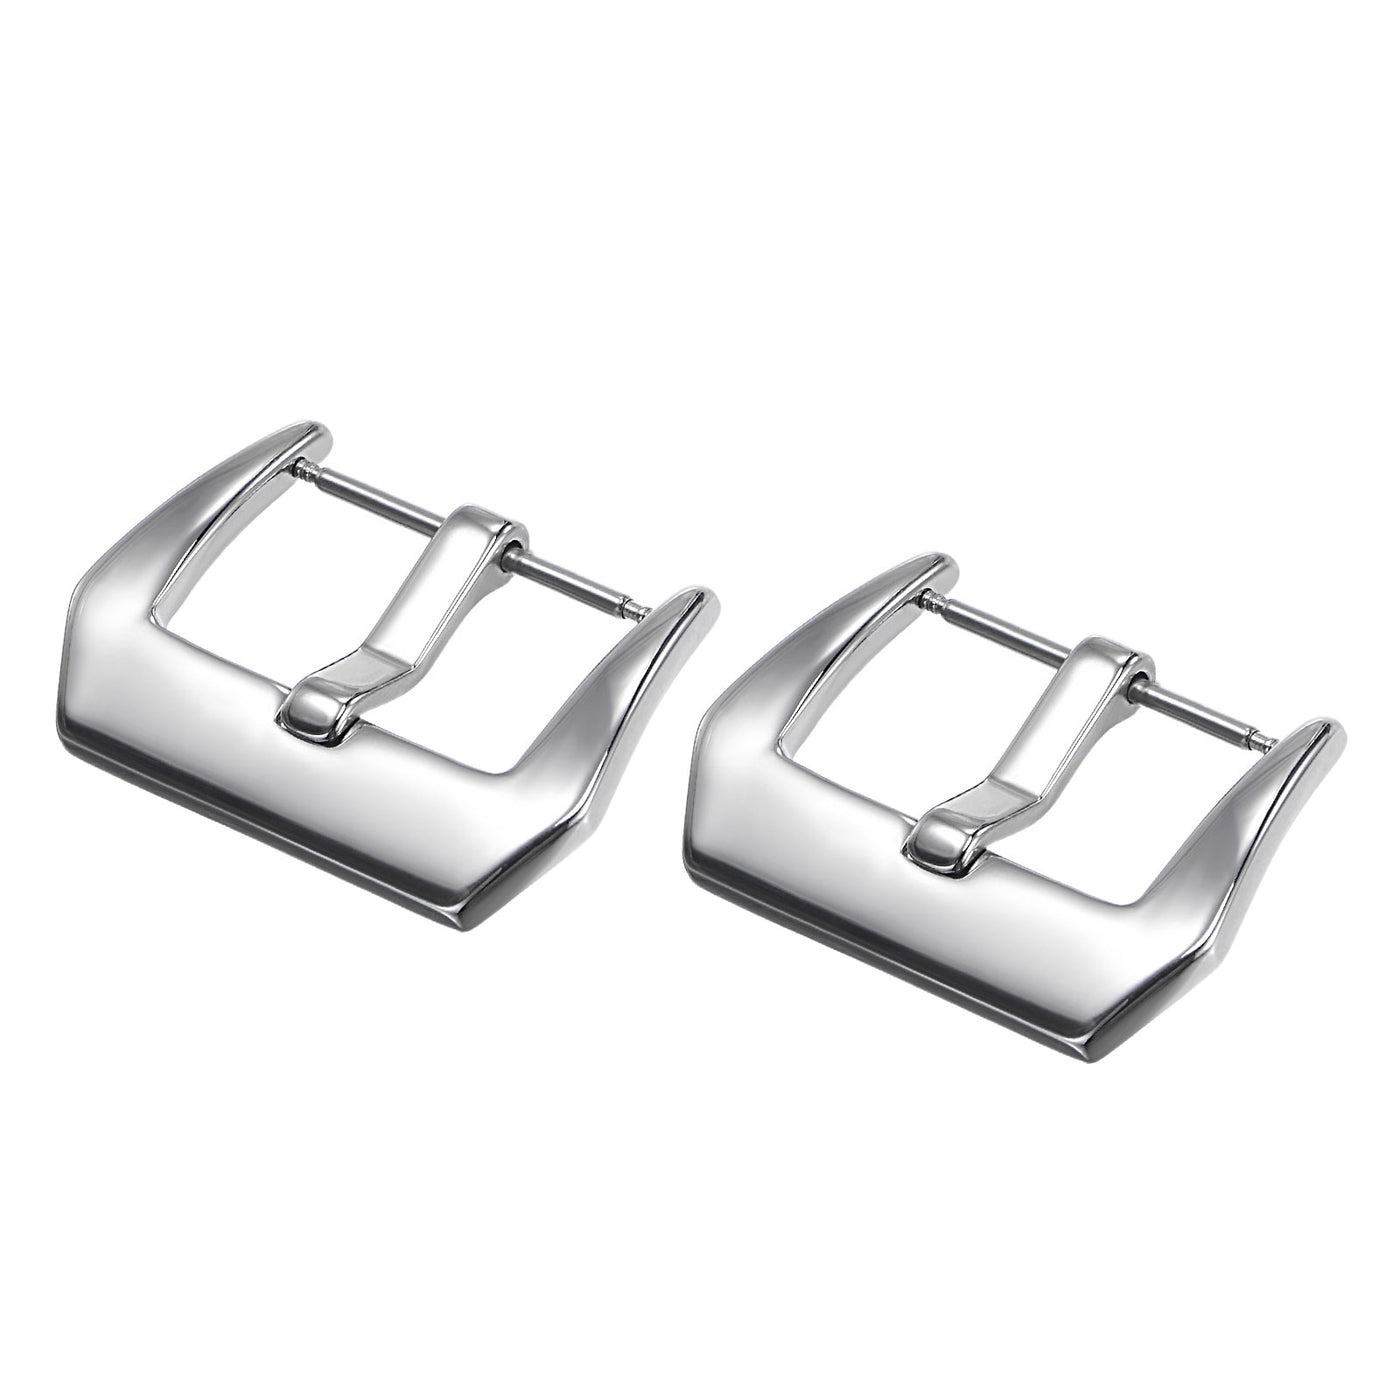 Uxcell Uxcell Watch SUS304 Polished PVD Buckle, Silver Tone for 26mm Width Watch Bands 2 Pcs